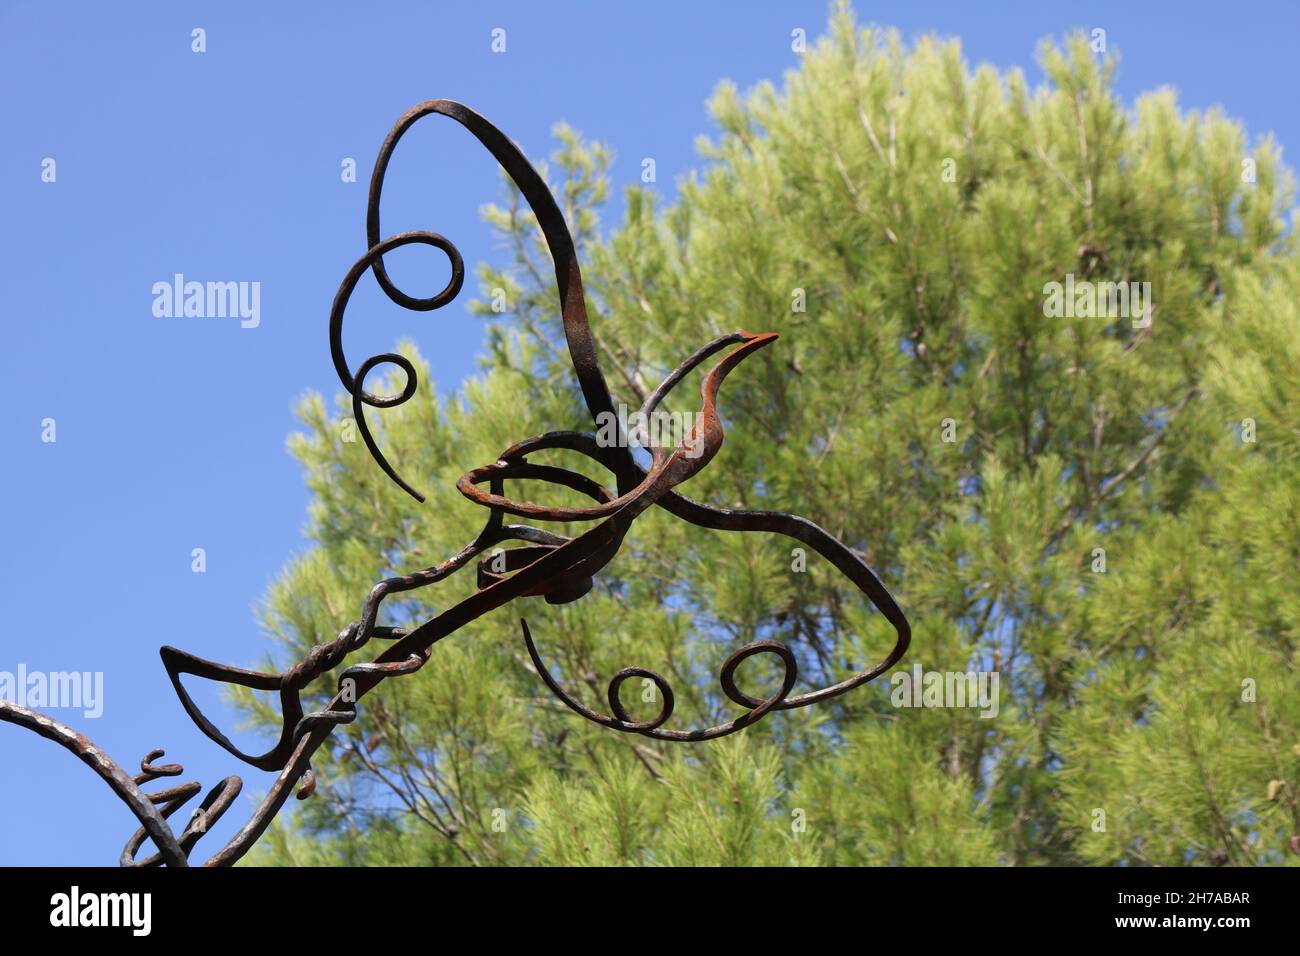 Wrought iron sculpture of a flying bird against blue sky and a tree Stock Photo